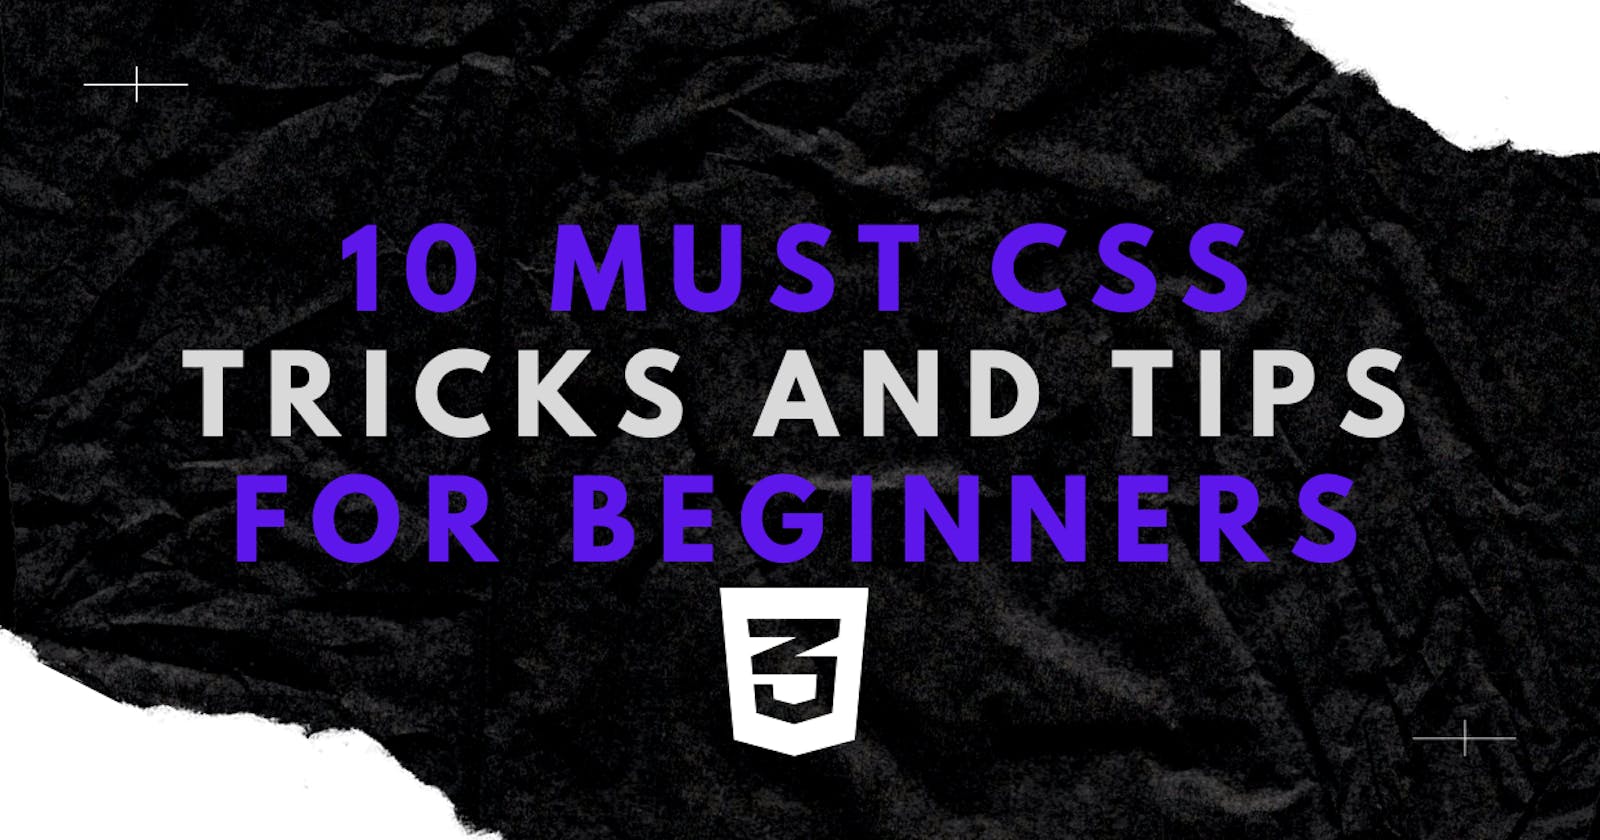 10 Must CSS tricks and tips for beginners